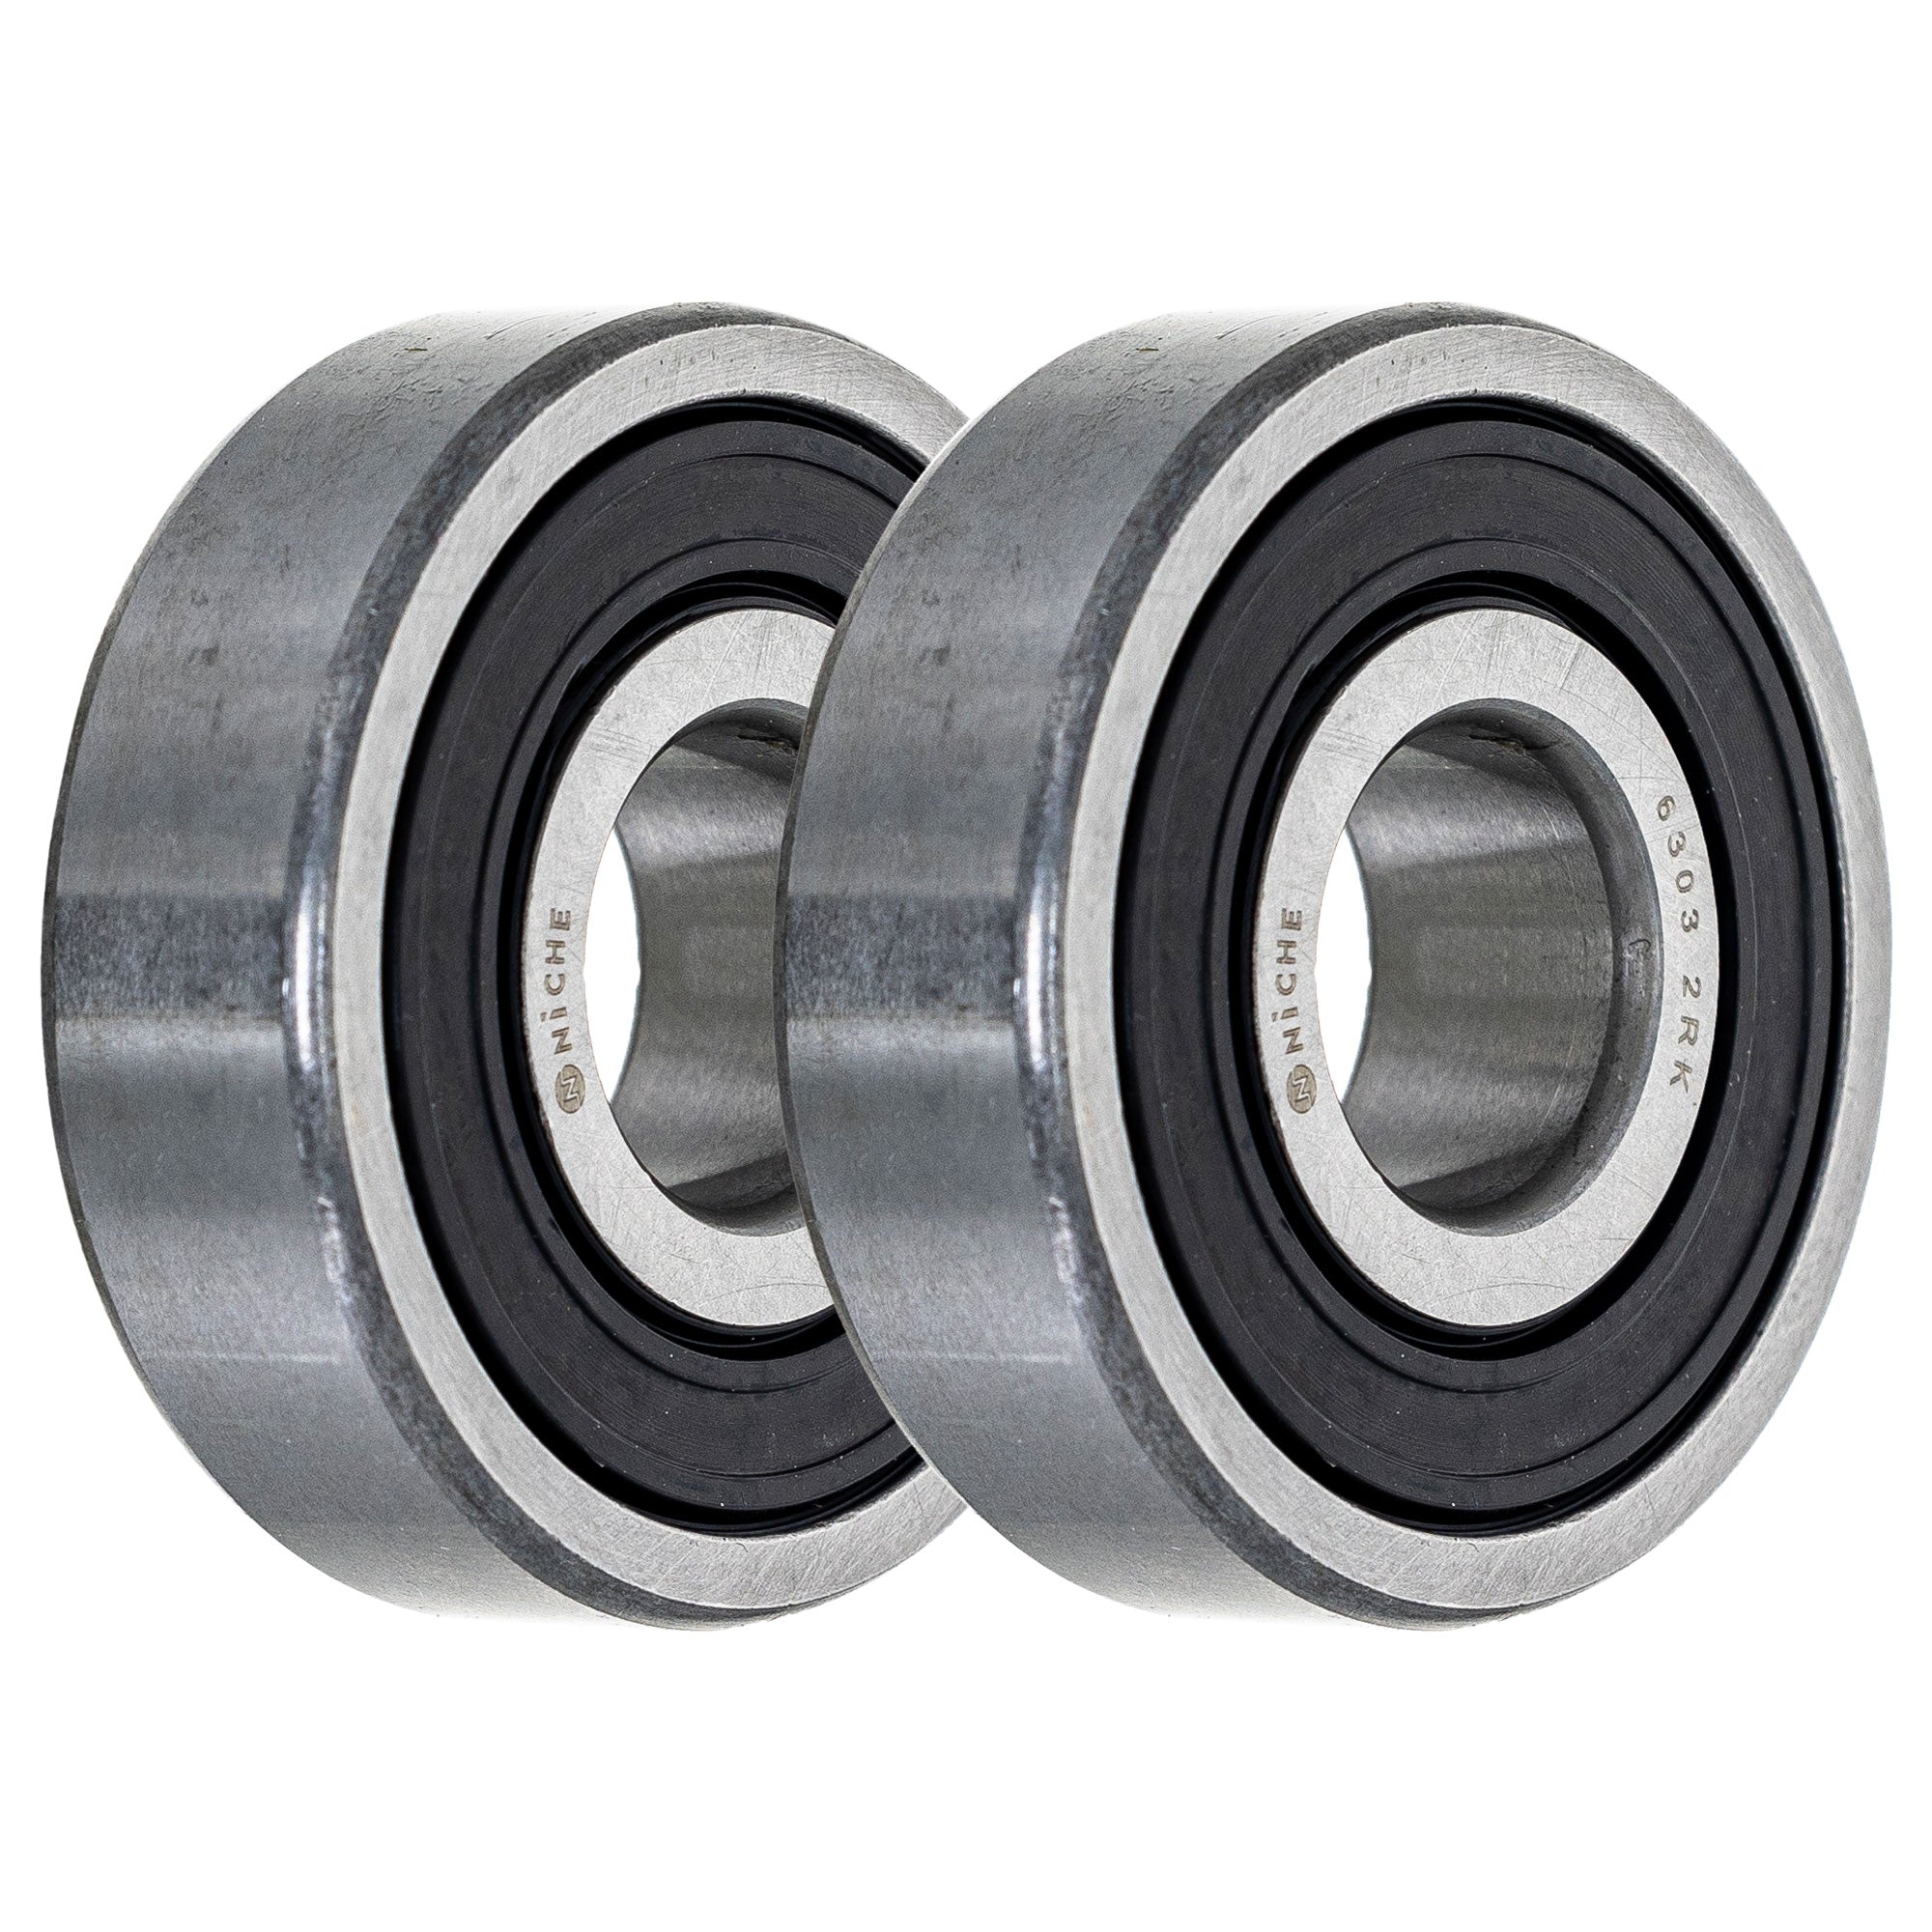 Electric Grade, Single Row, Deep Groove, Ball Bearing Pack of 2 2-Pack for zOTHER YZ85 NICHE 519-CBB2328R